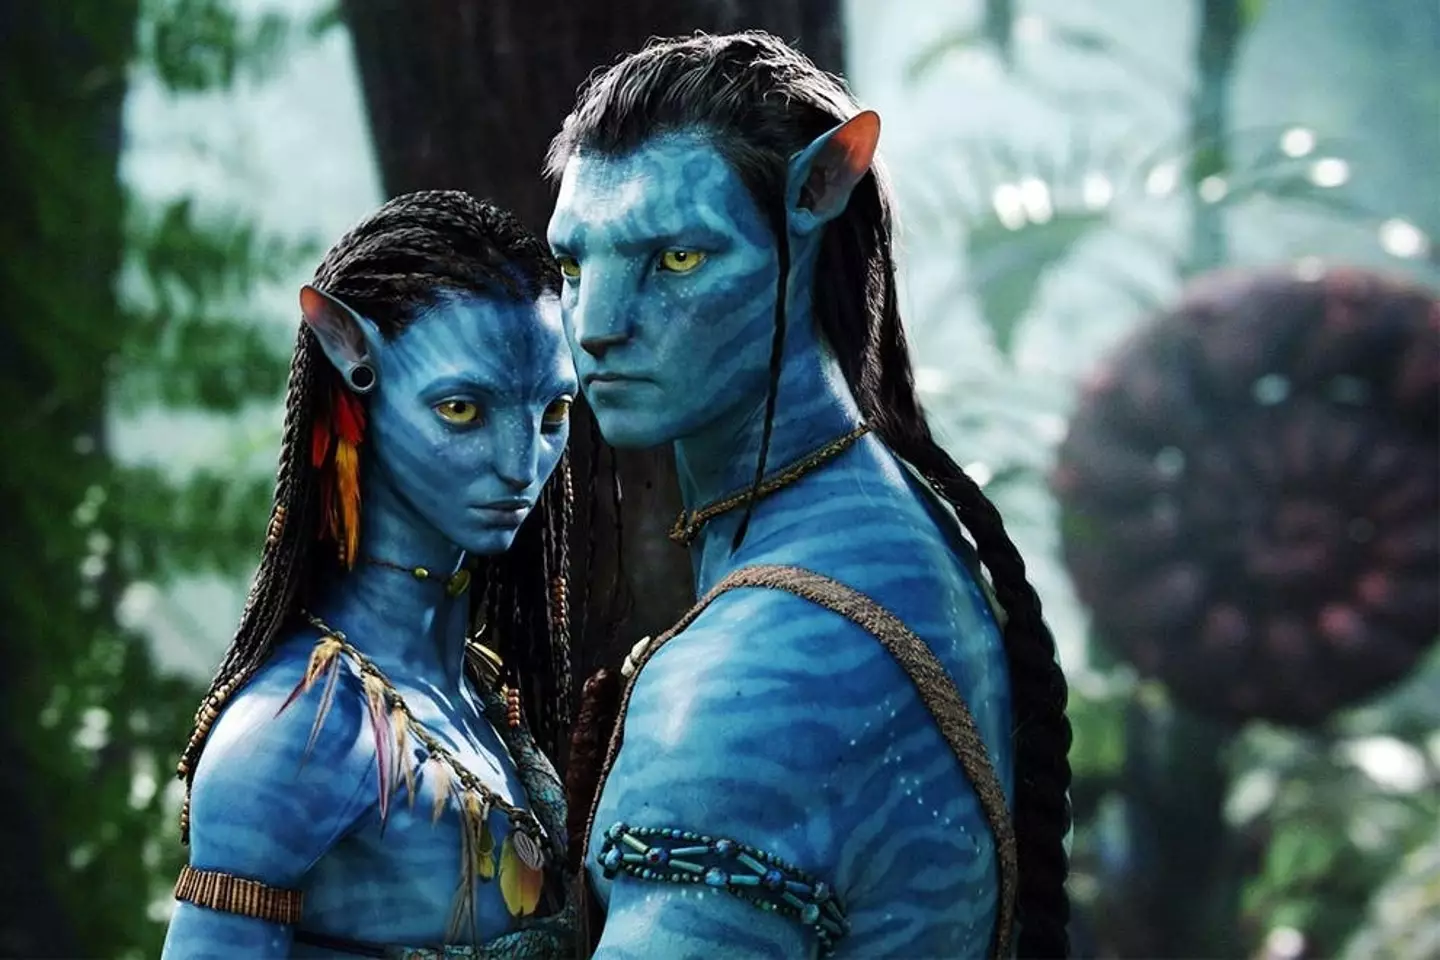 The costume was inspired by the Avatar filmi (